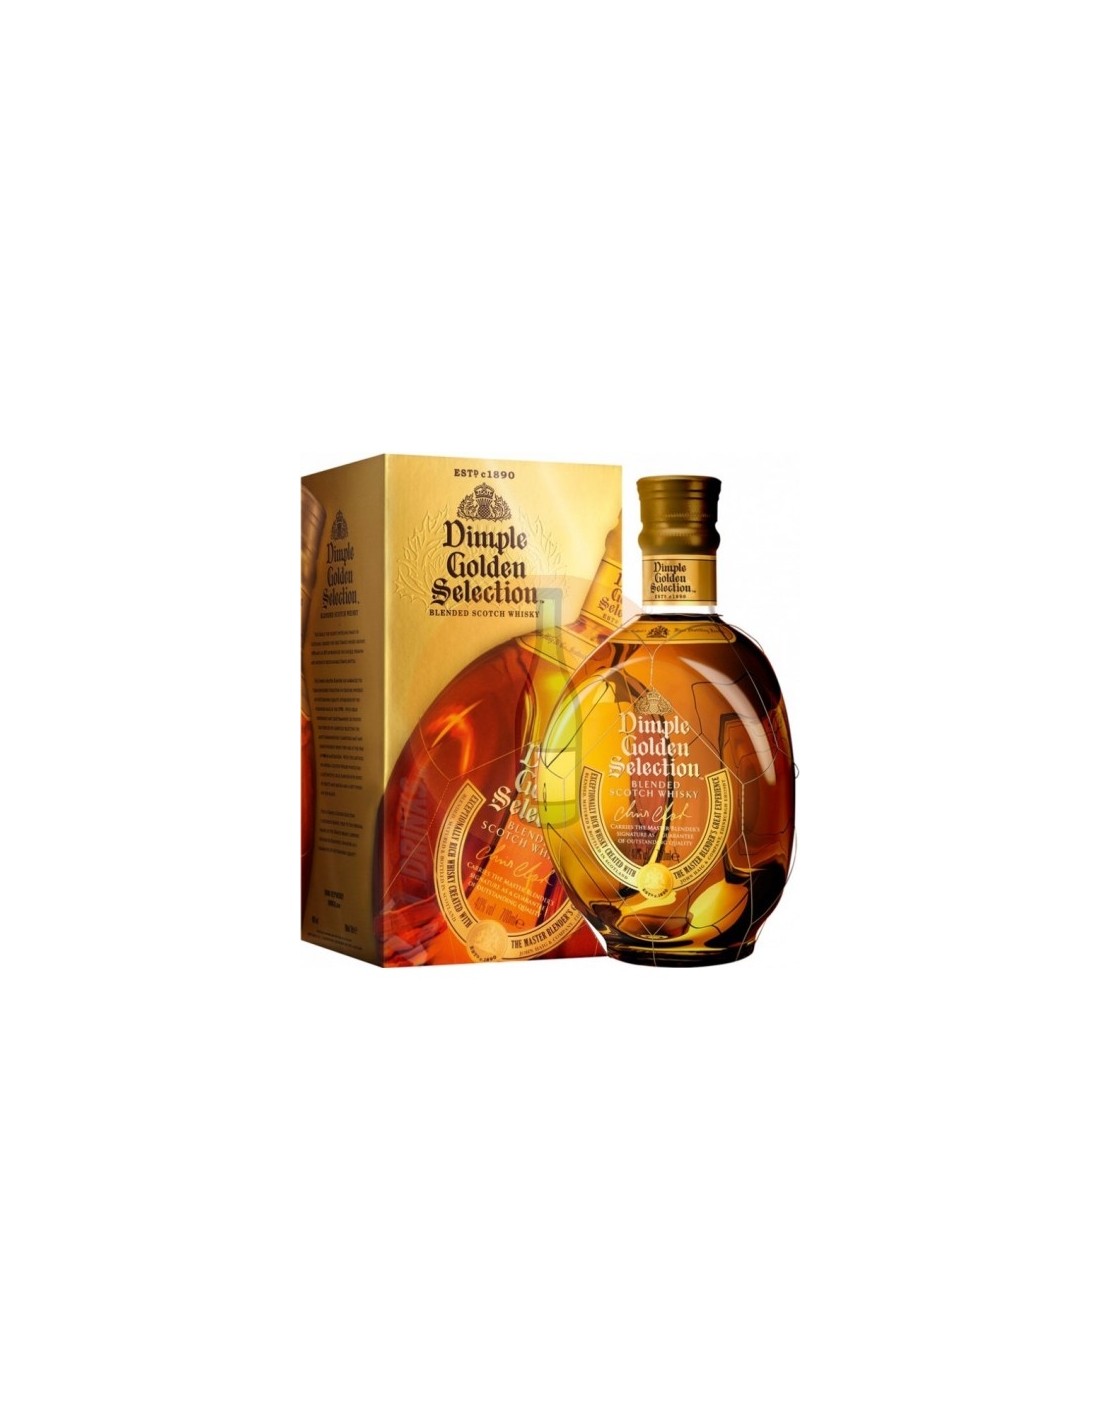 Whisky Dimple Golden Selection, 0.7L, 40% alc., Scotia alcooldiscount.ro